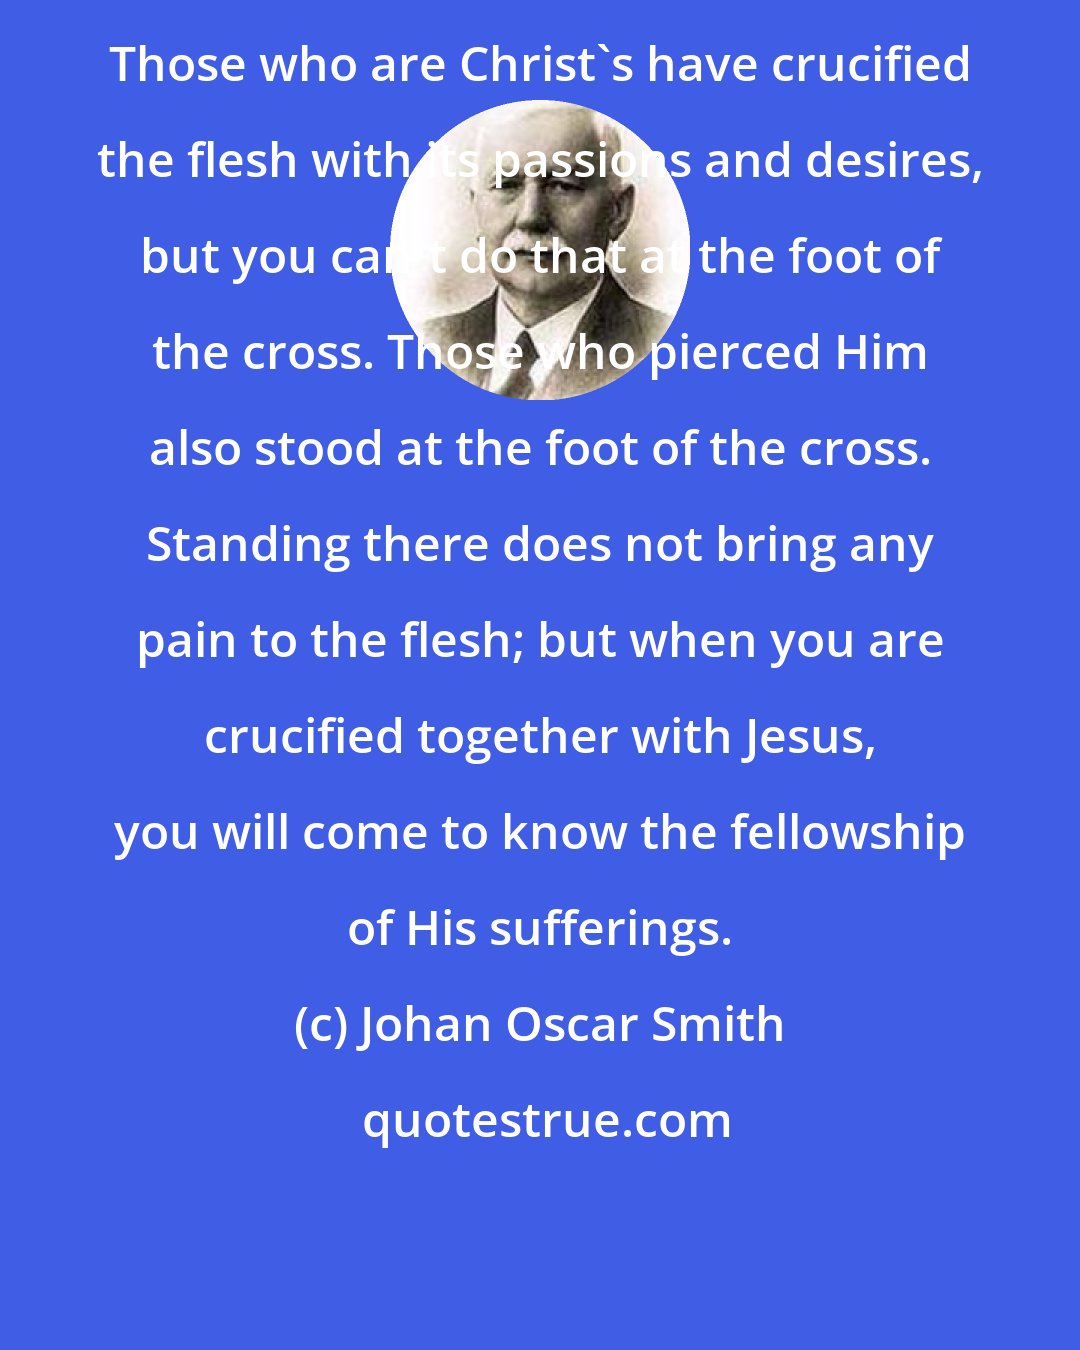 Johan Oscar Smith: Those who are Christ's have crucified the flesh with its passions and desires, but you can't do that at the foot of the cross. Those who pierced Him also stood at the foot of the cross. Standing there does not bring any pain to the flesh; but when you are crucified together with Jesus, you will come to know the fellowship of His sufferings.